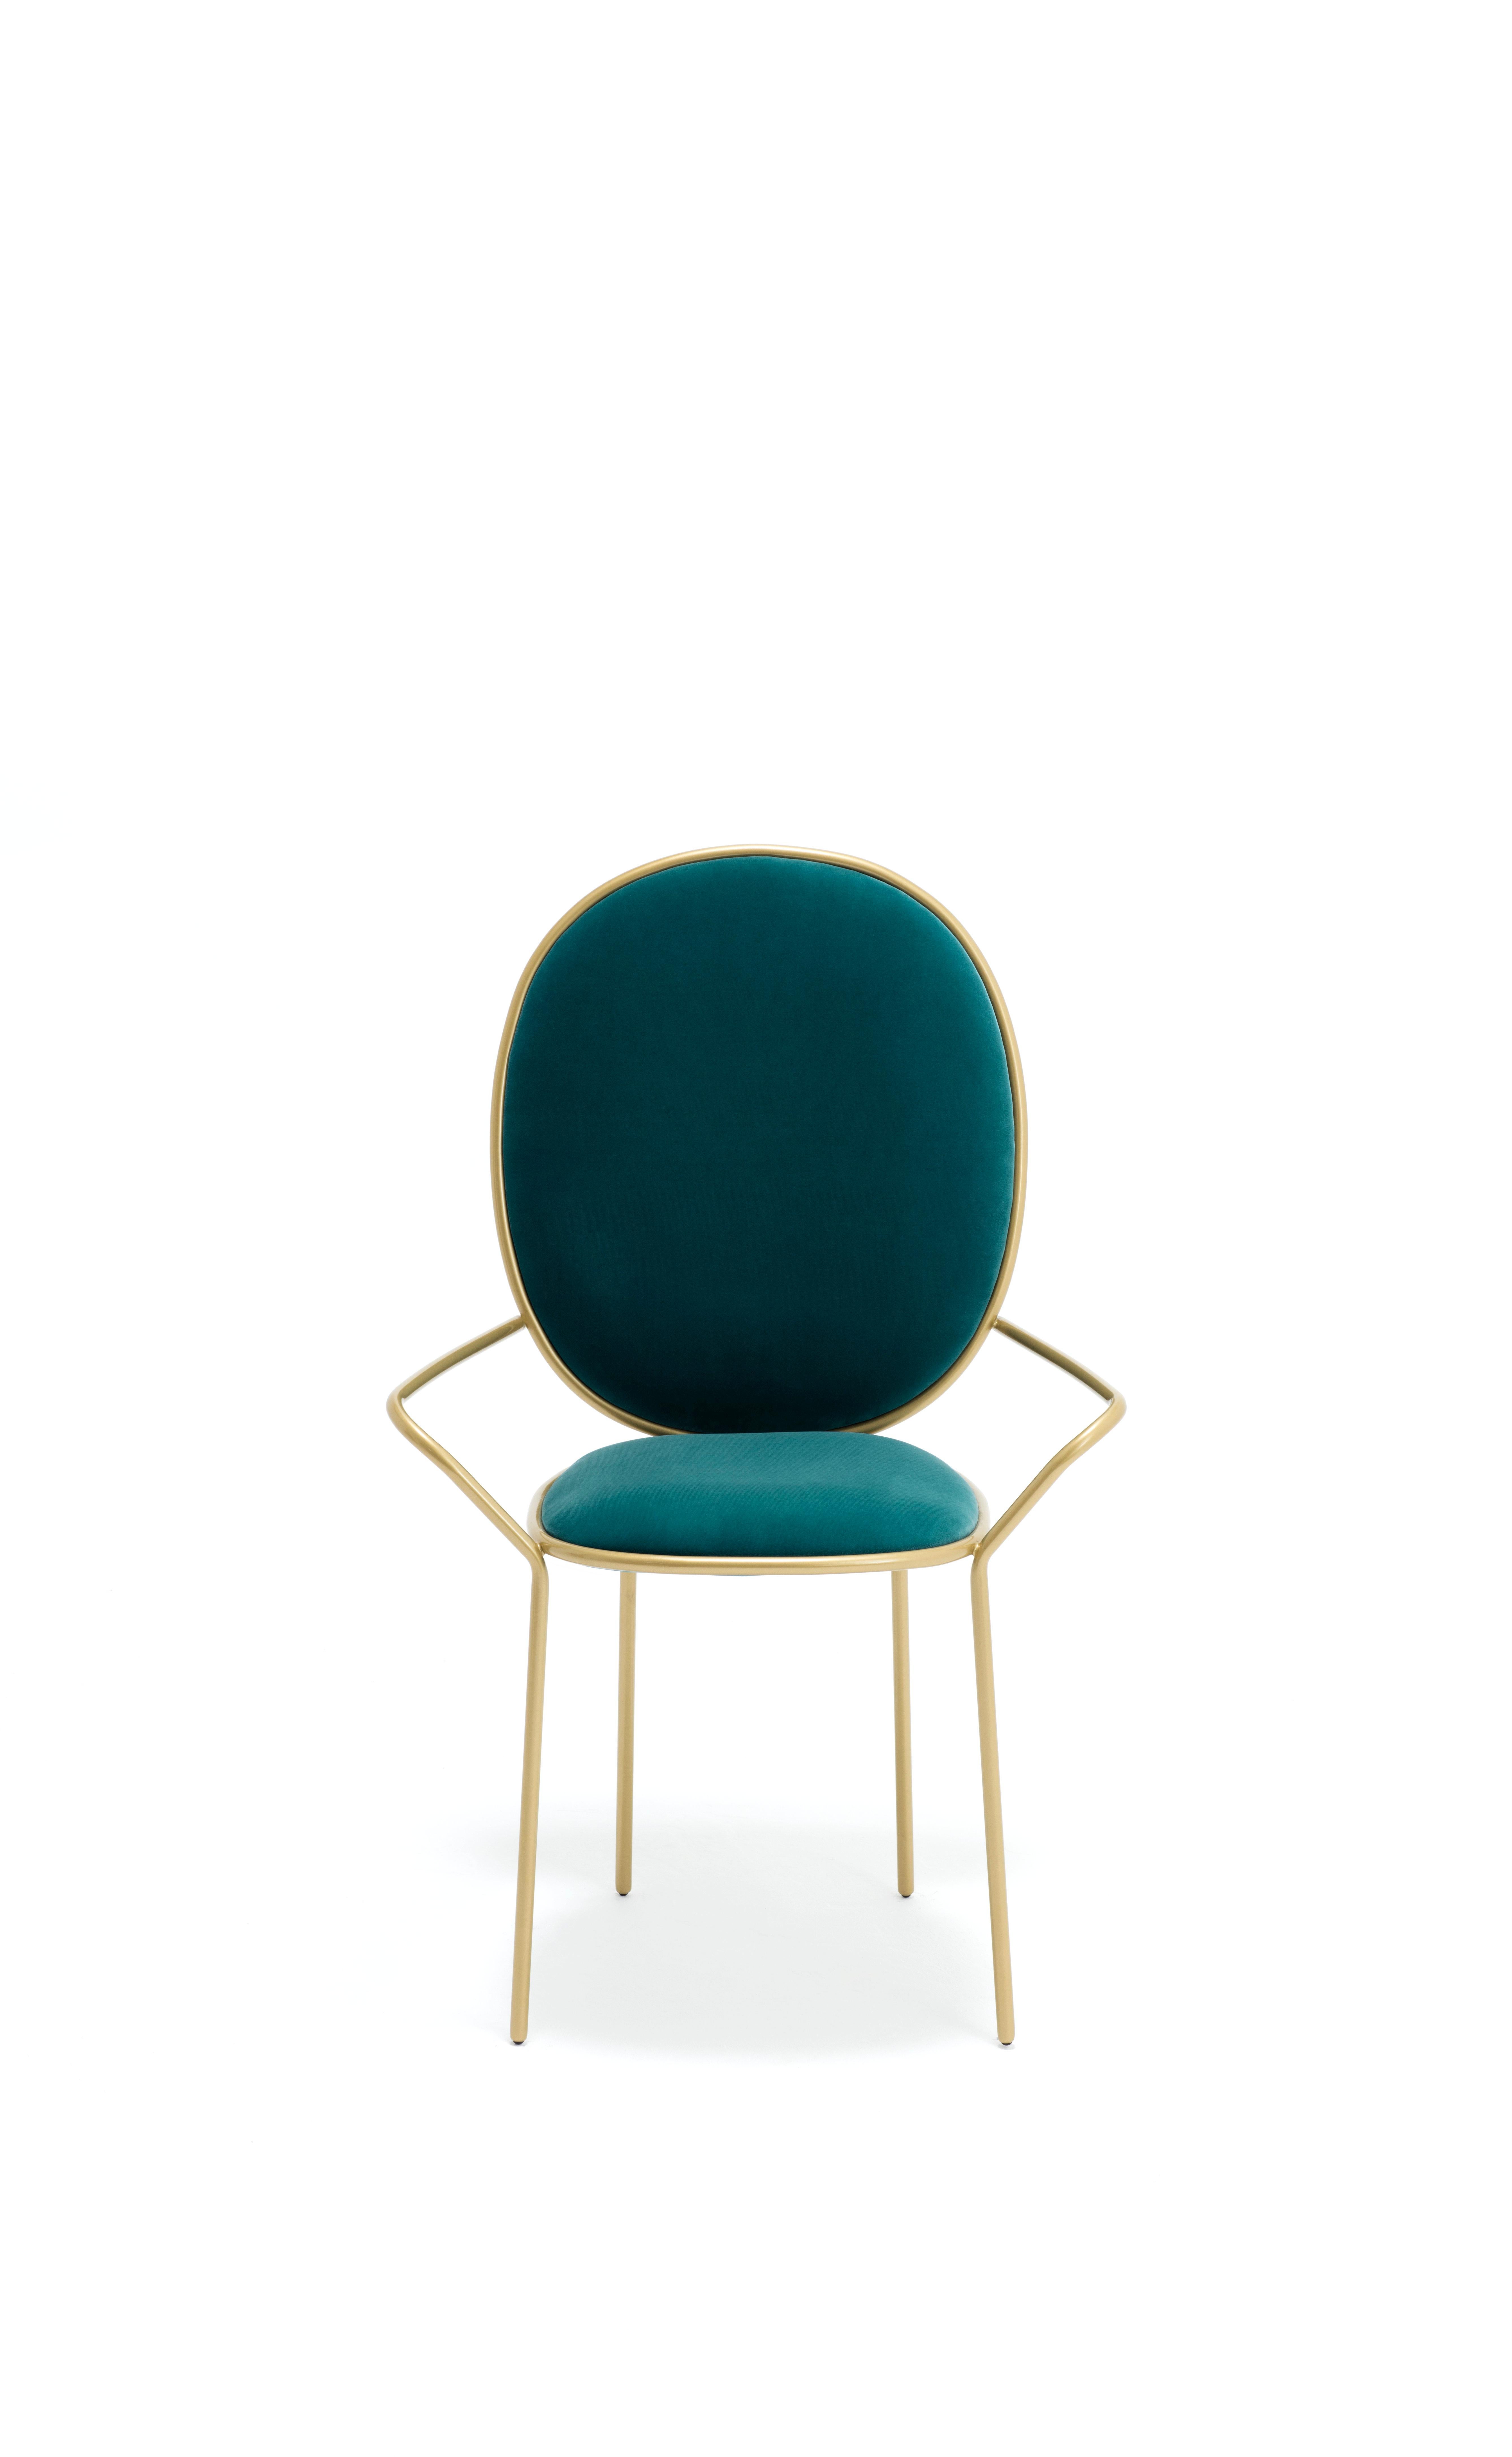 Contemporary Ocean Green Velvet Upholstered Dining Armchair, Stay by Nika Zupanc In New Condition For Sale In Warsaw, PL